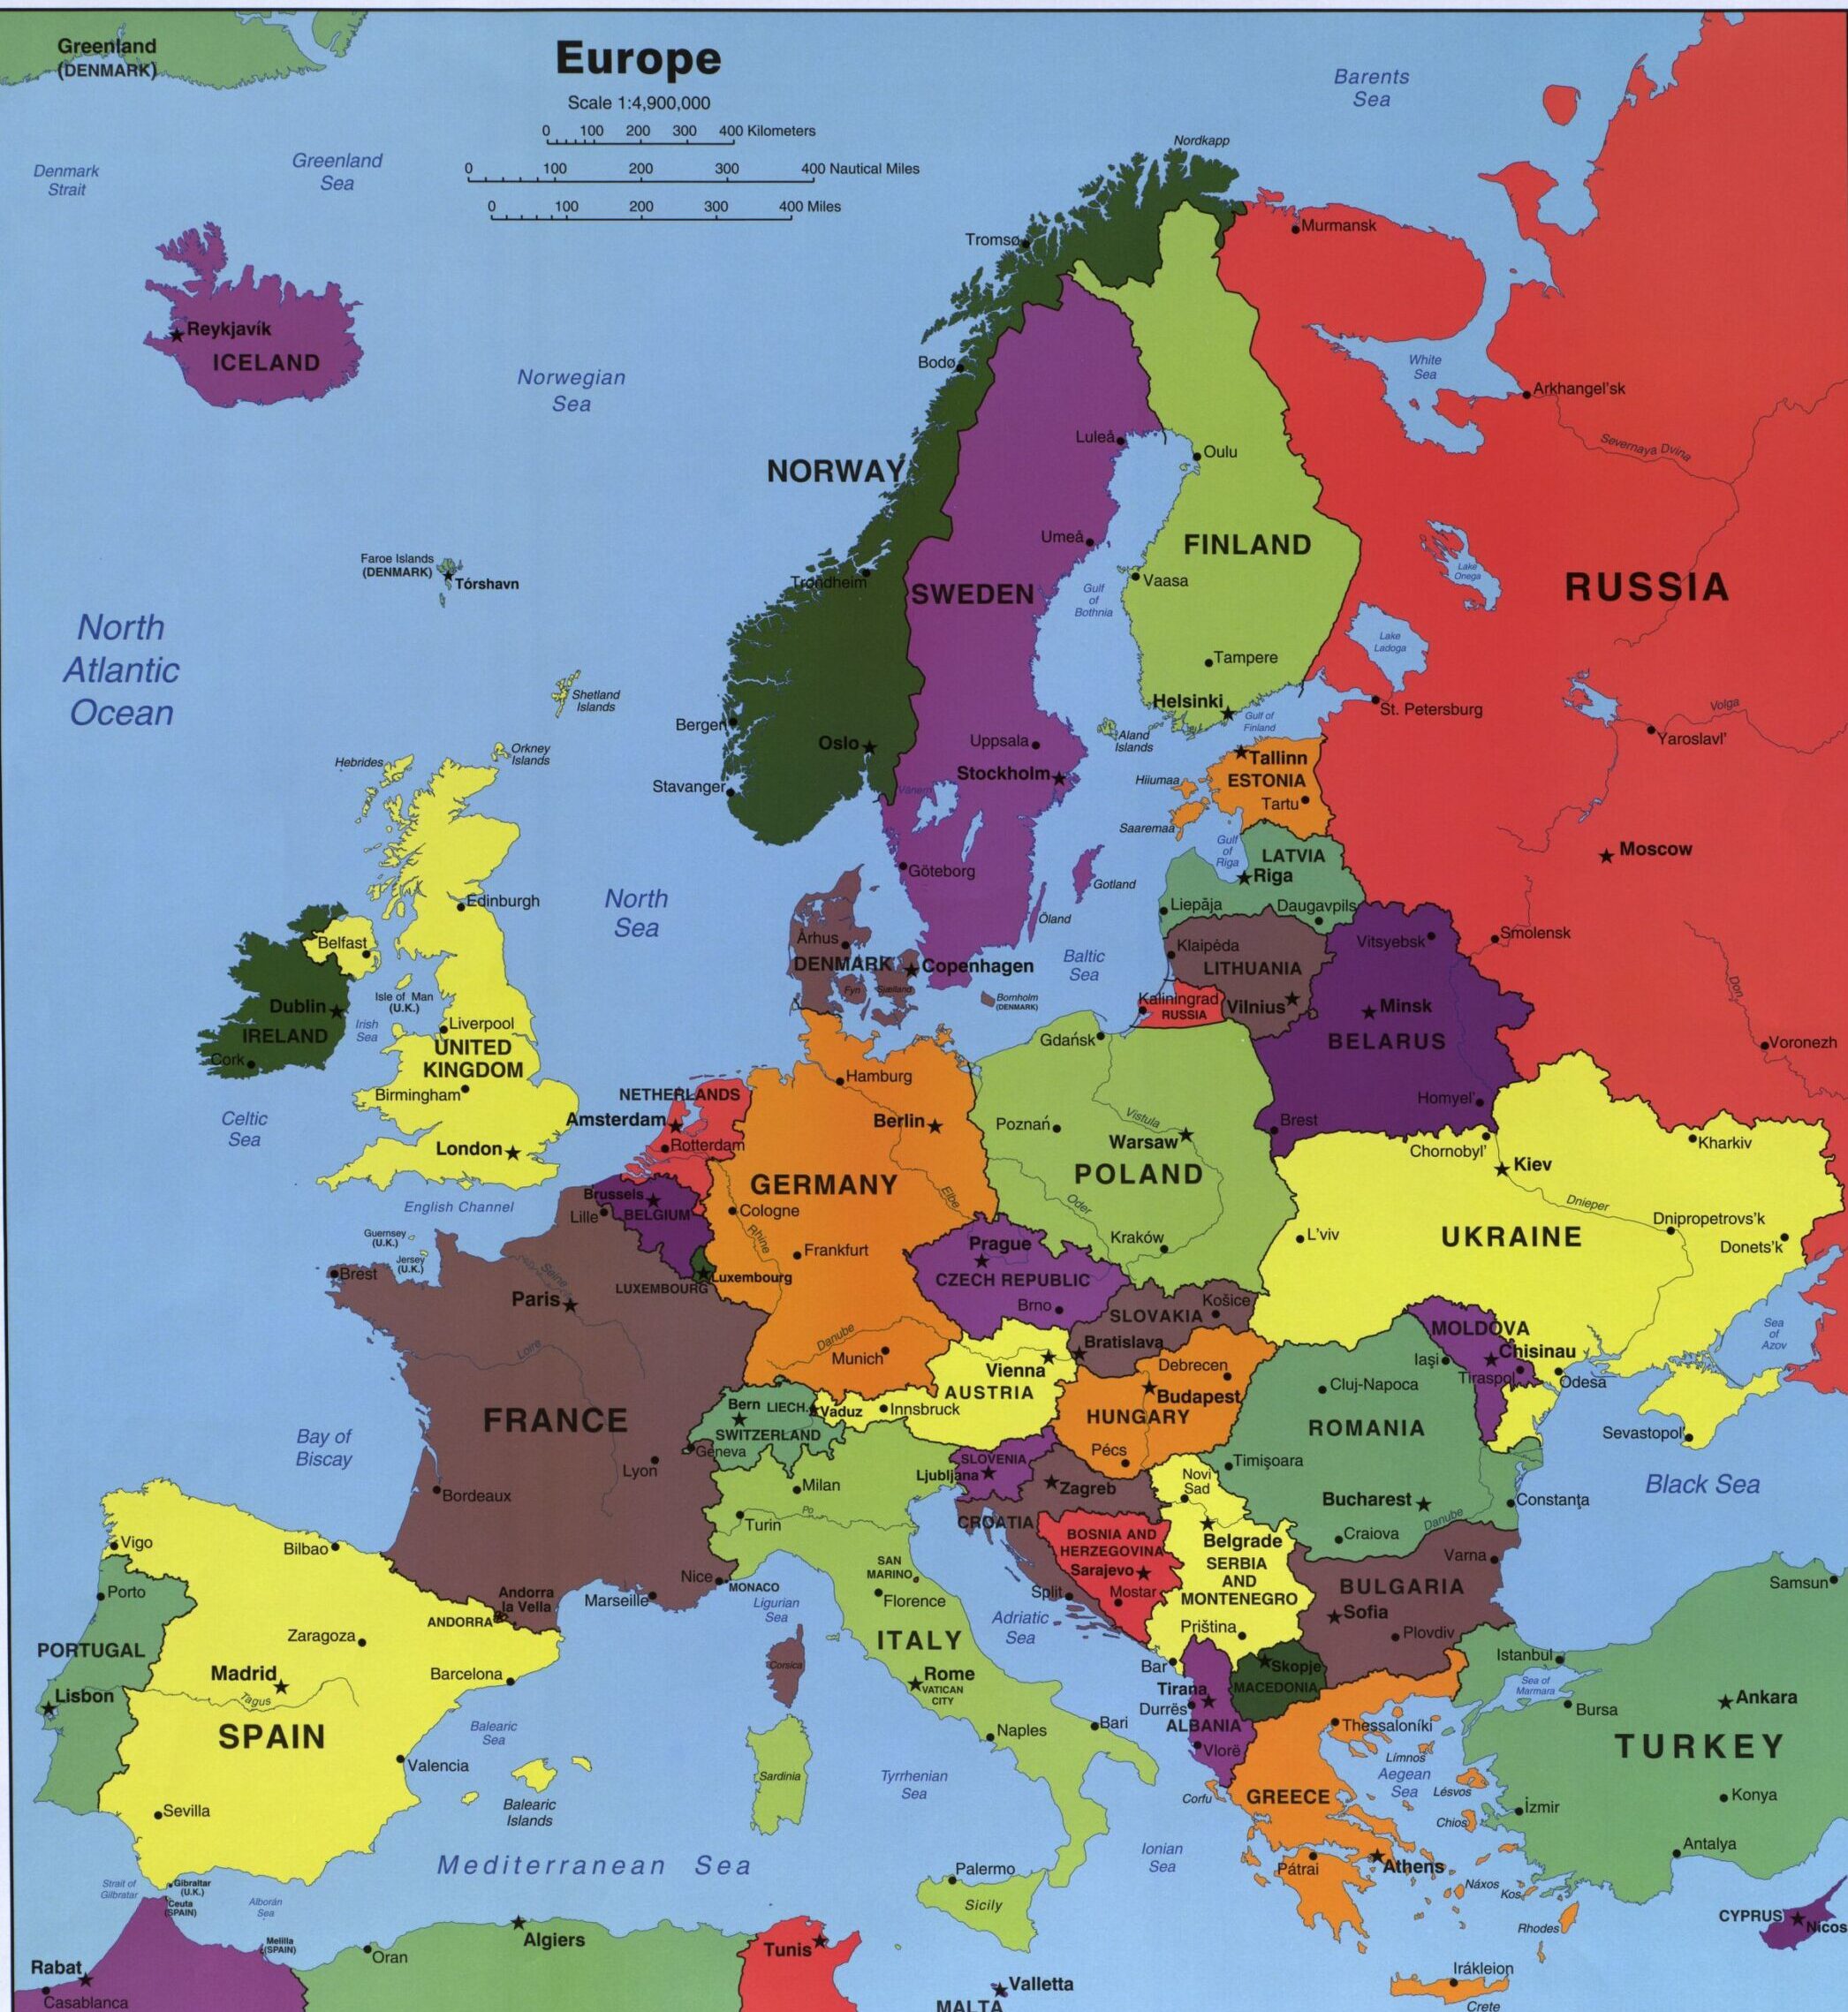 Map of Europe, adapted from image at loc.gov